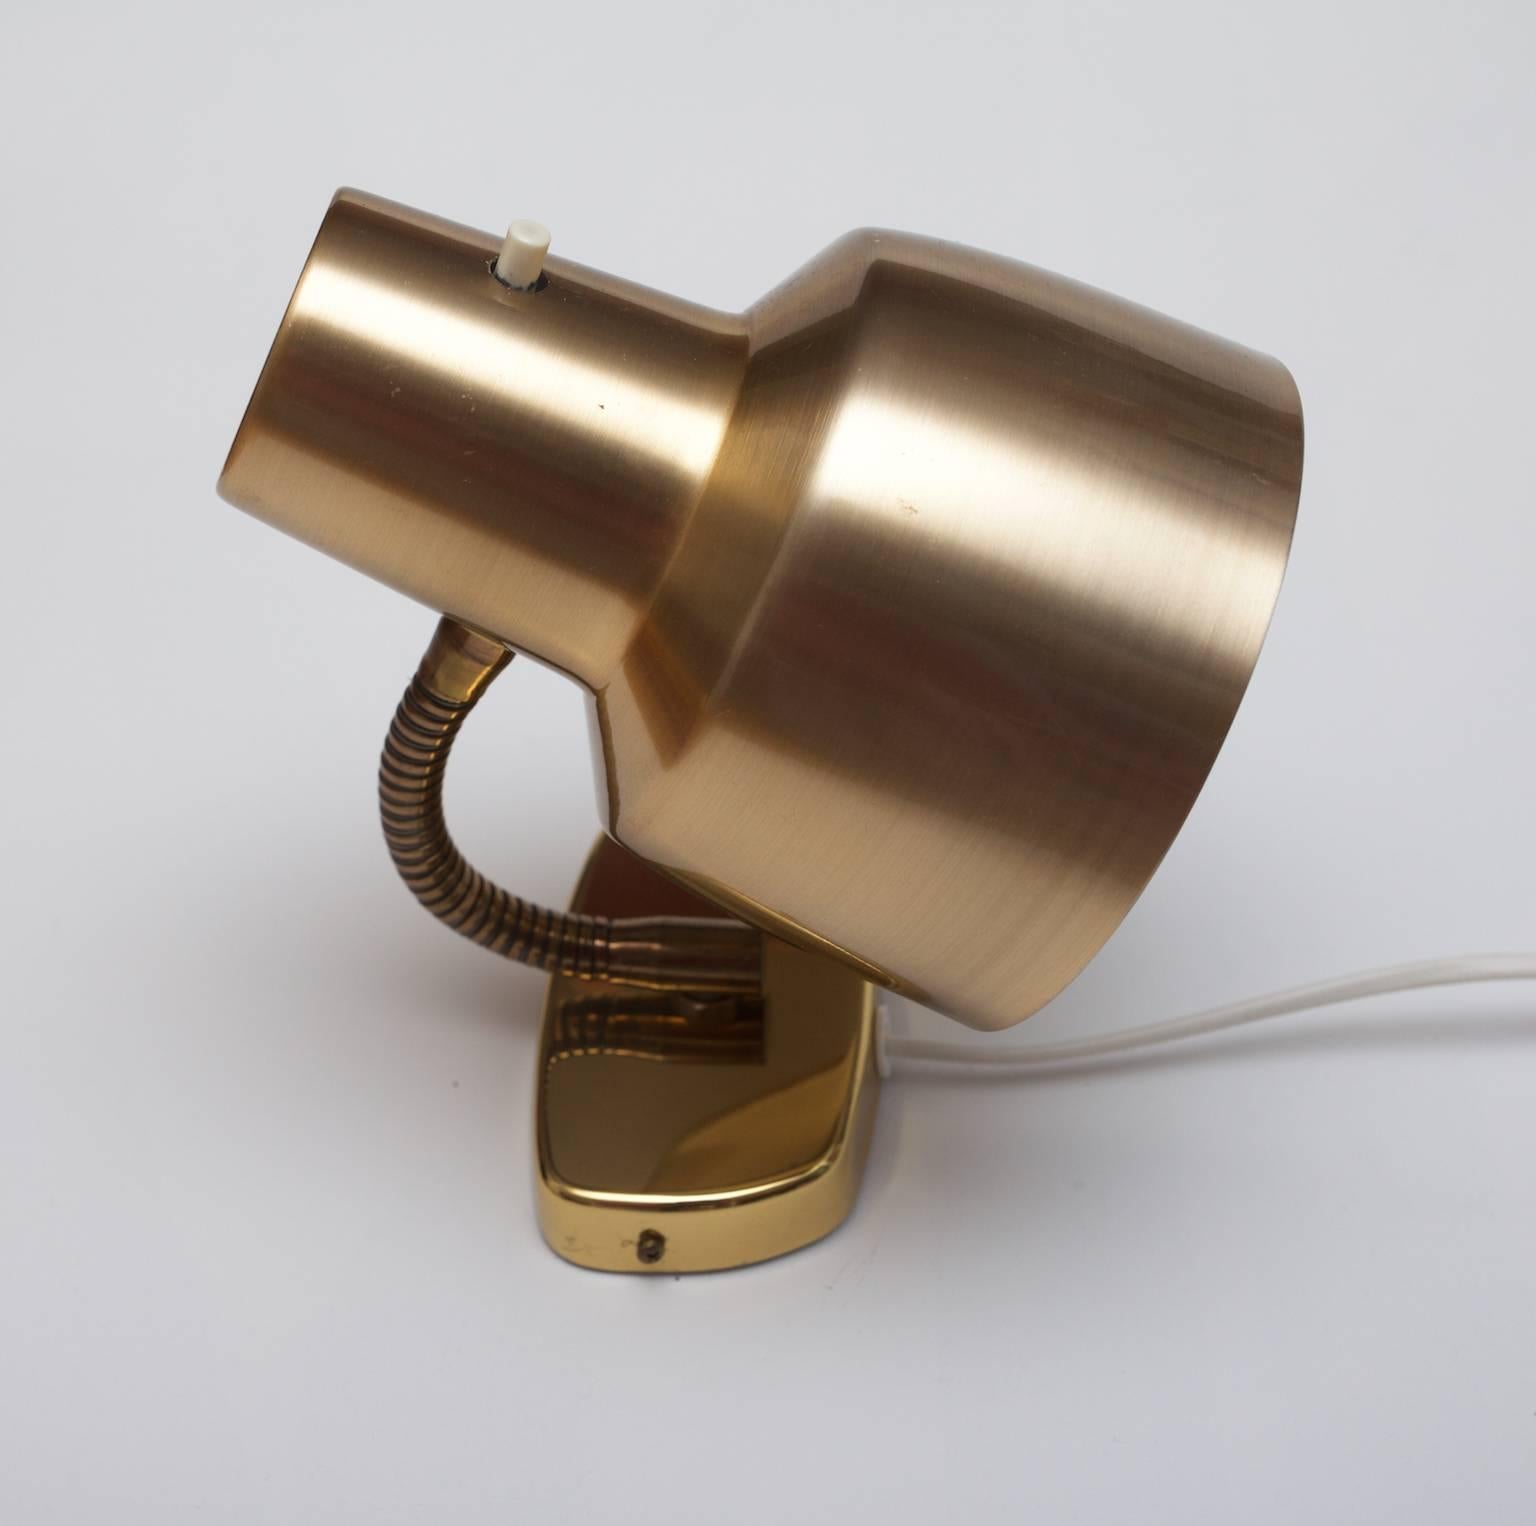 Wall Lamp in Brass and Anodized Aluminium, Sweden 1960s from Armaturhantverk In Good Condition For Sale In Malmo, SE